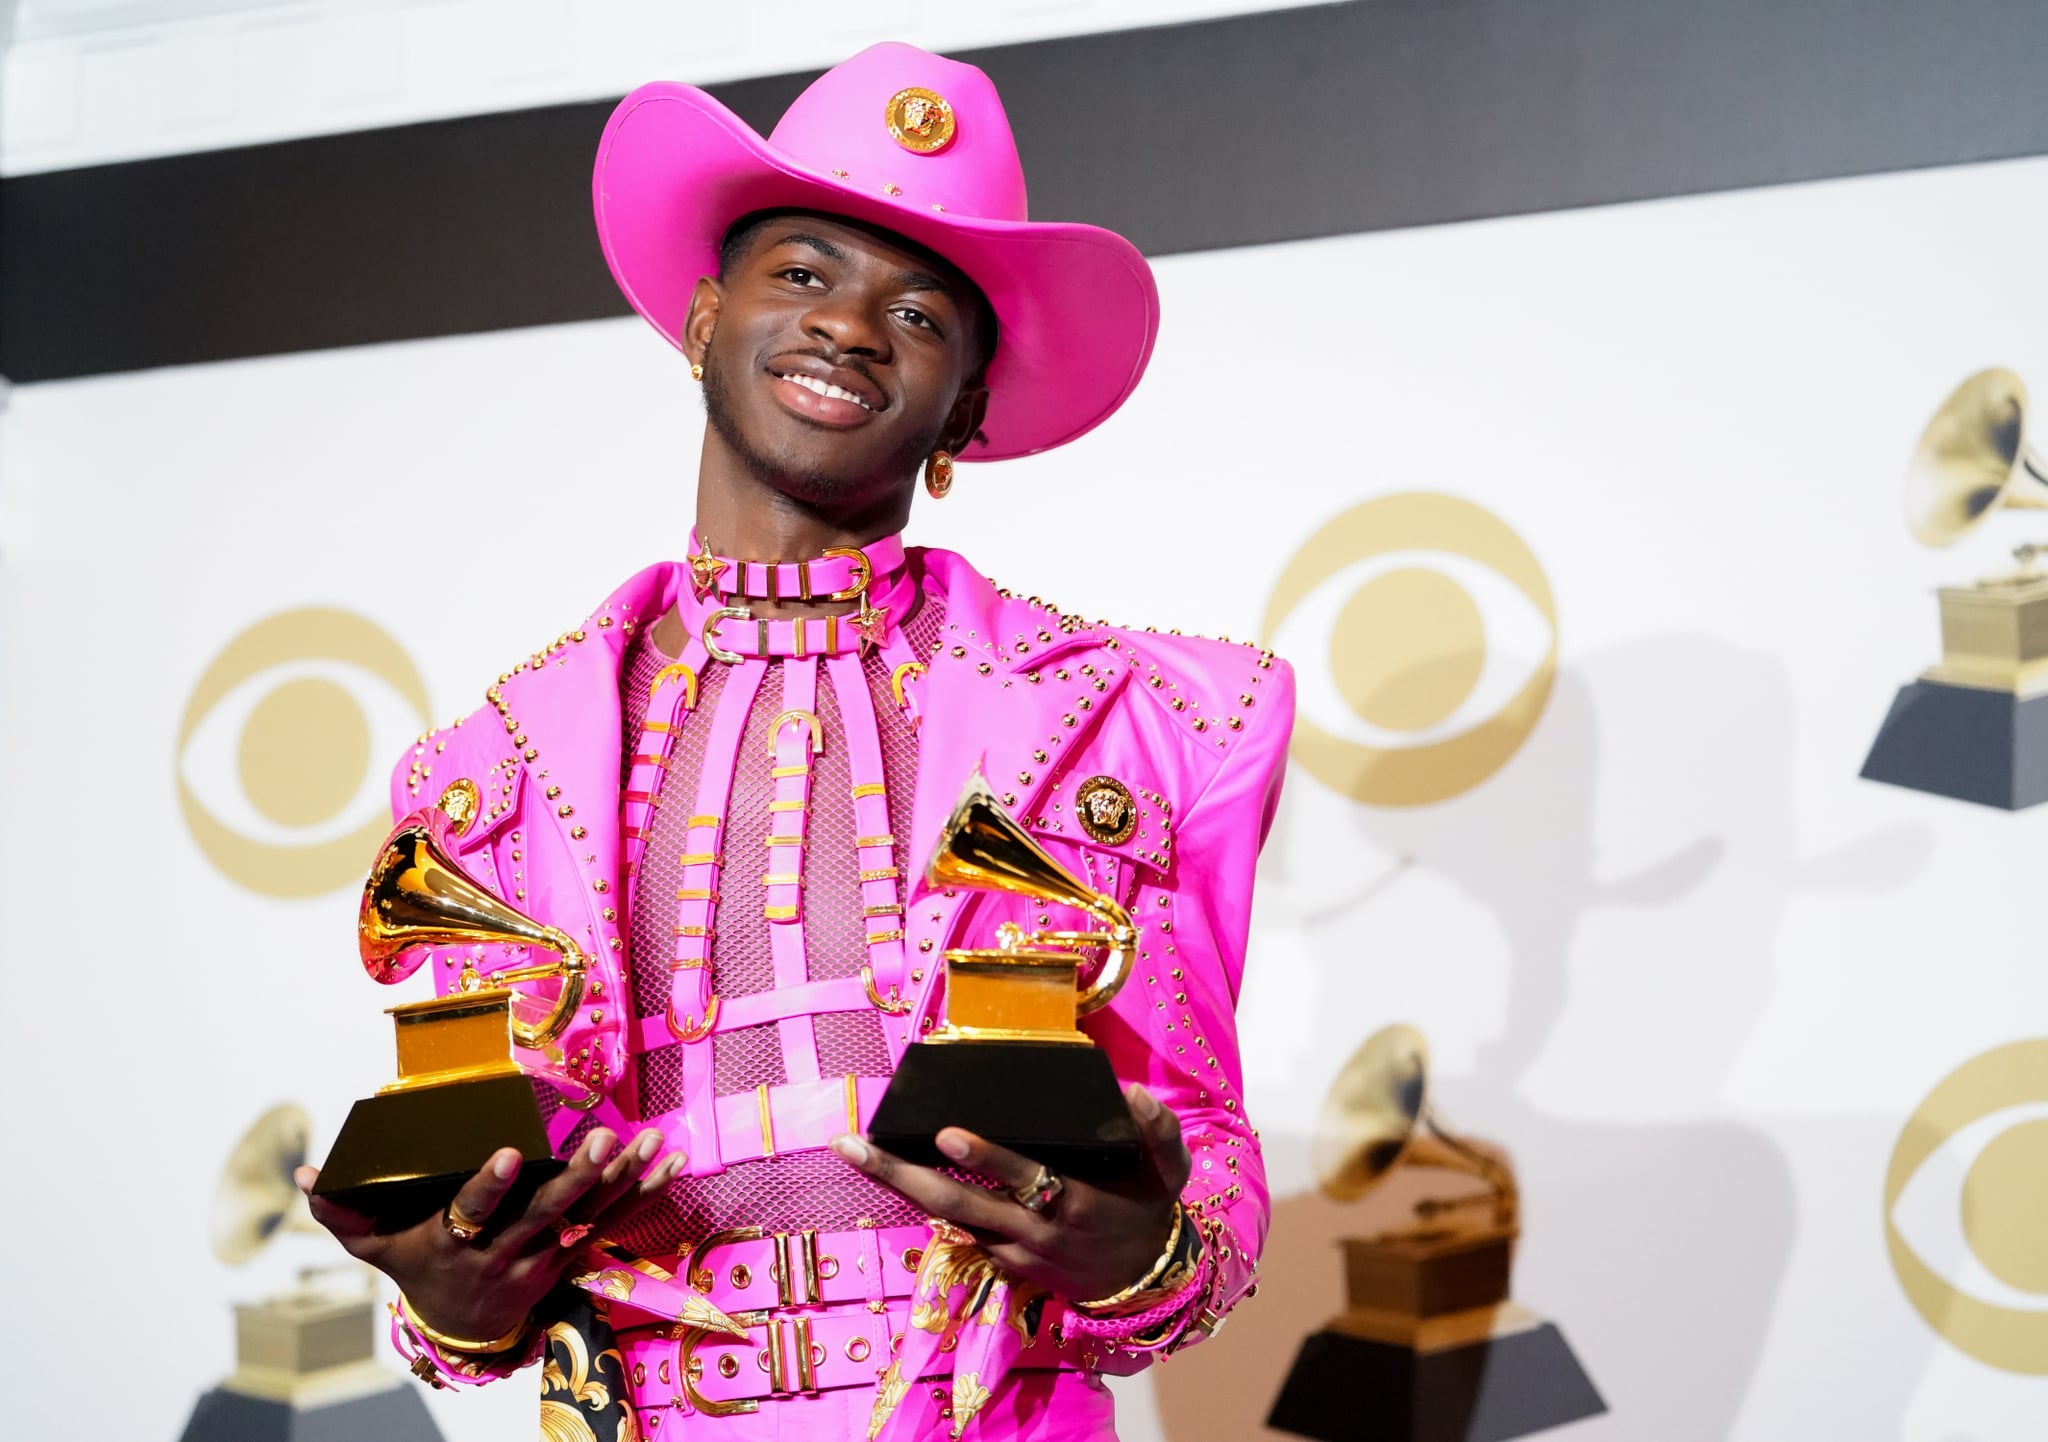 LOS ANGELES, CALIFORNIA - JANUARY 26: Lil Nas X poses in the press room with the awards for Best Music Video and Best Pop Duo/Group Performance during the 62nd Annual GRAMMY Awards at Staples Center on January 26, 2020 in Los Angeles, California. (Photo by Rachel Luna/FilmMagic)